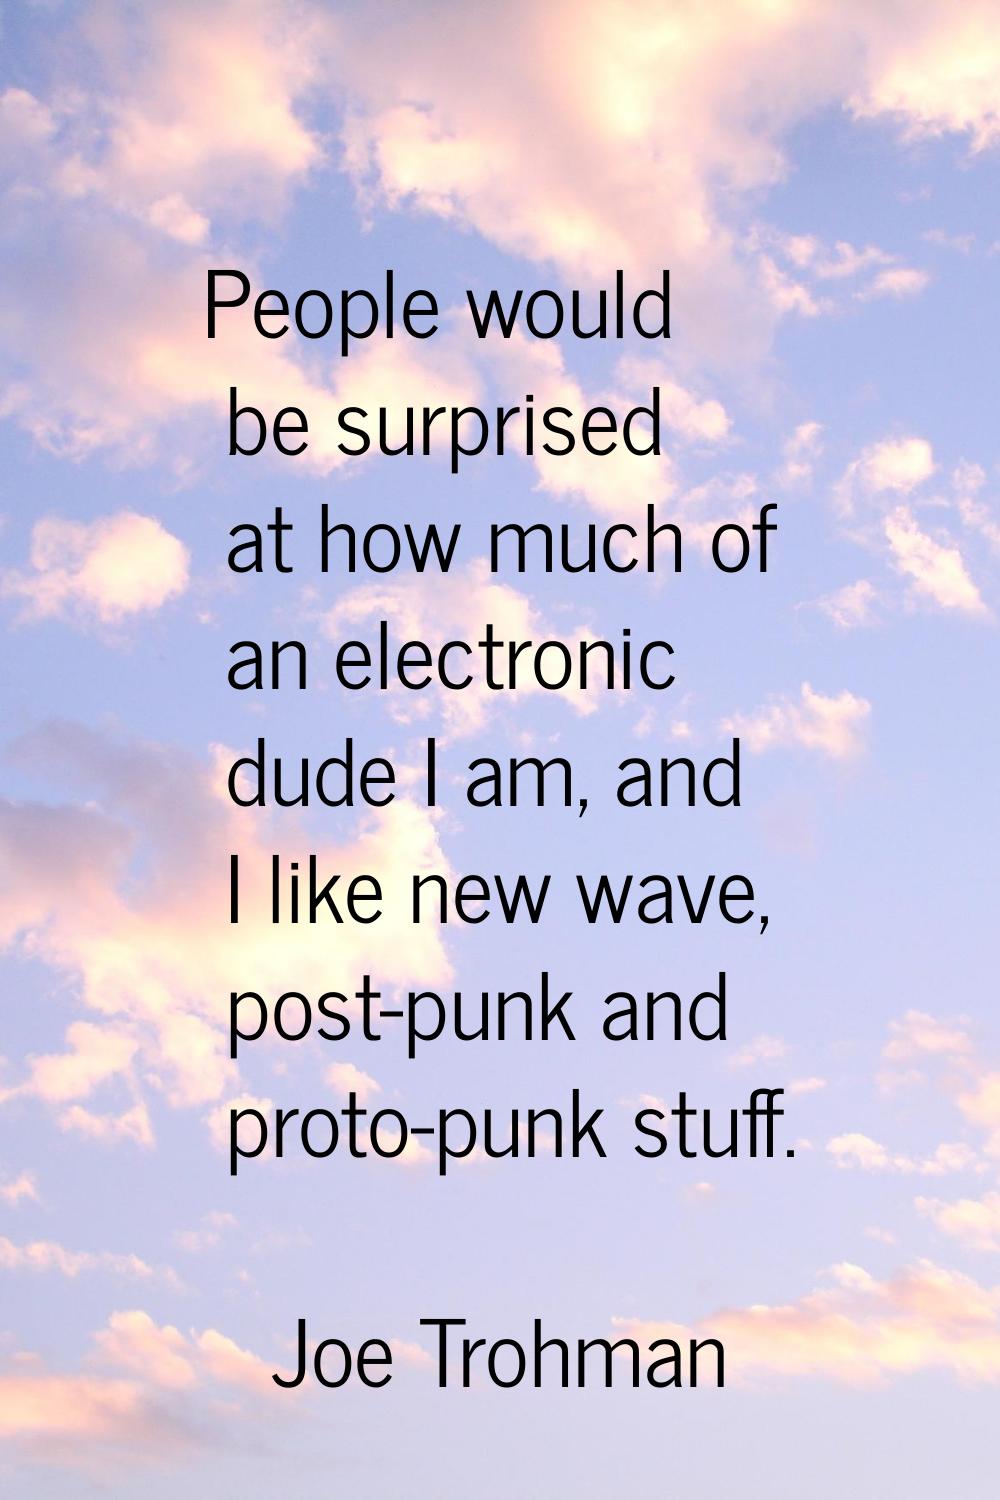 People would be surprised at how much of an electronic dude I am, and I like new wave, post-punk an